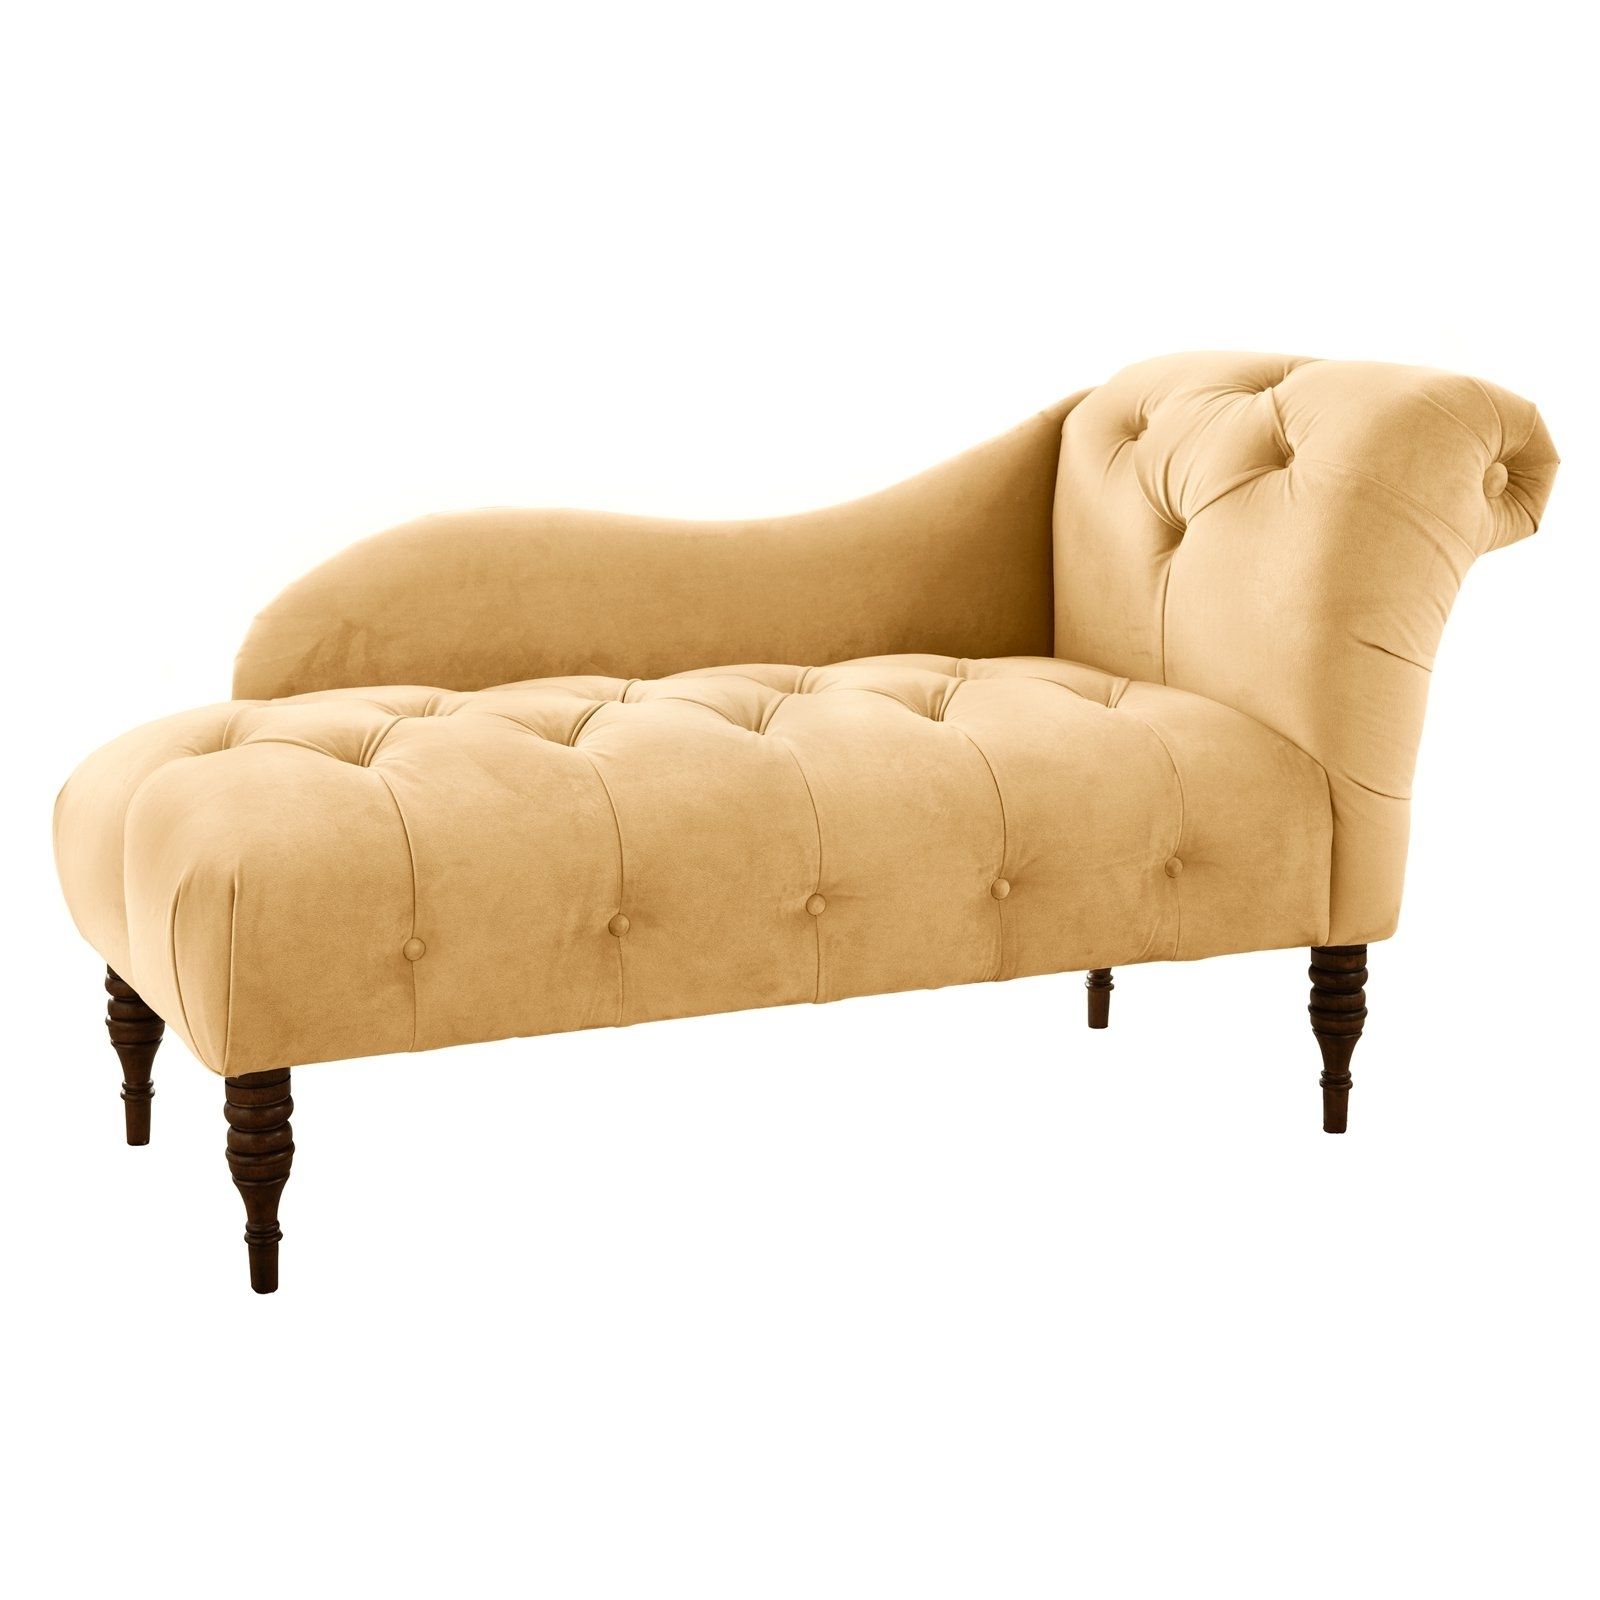 Hayneedle Intended For Most Current Upholstered Chaise Lounges (Photo 9 of 15)